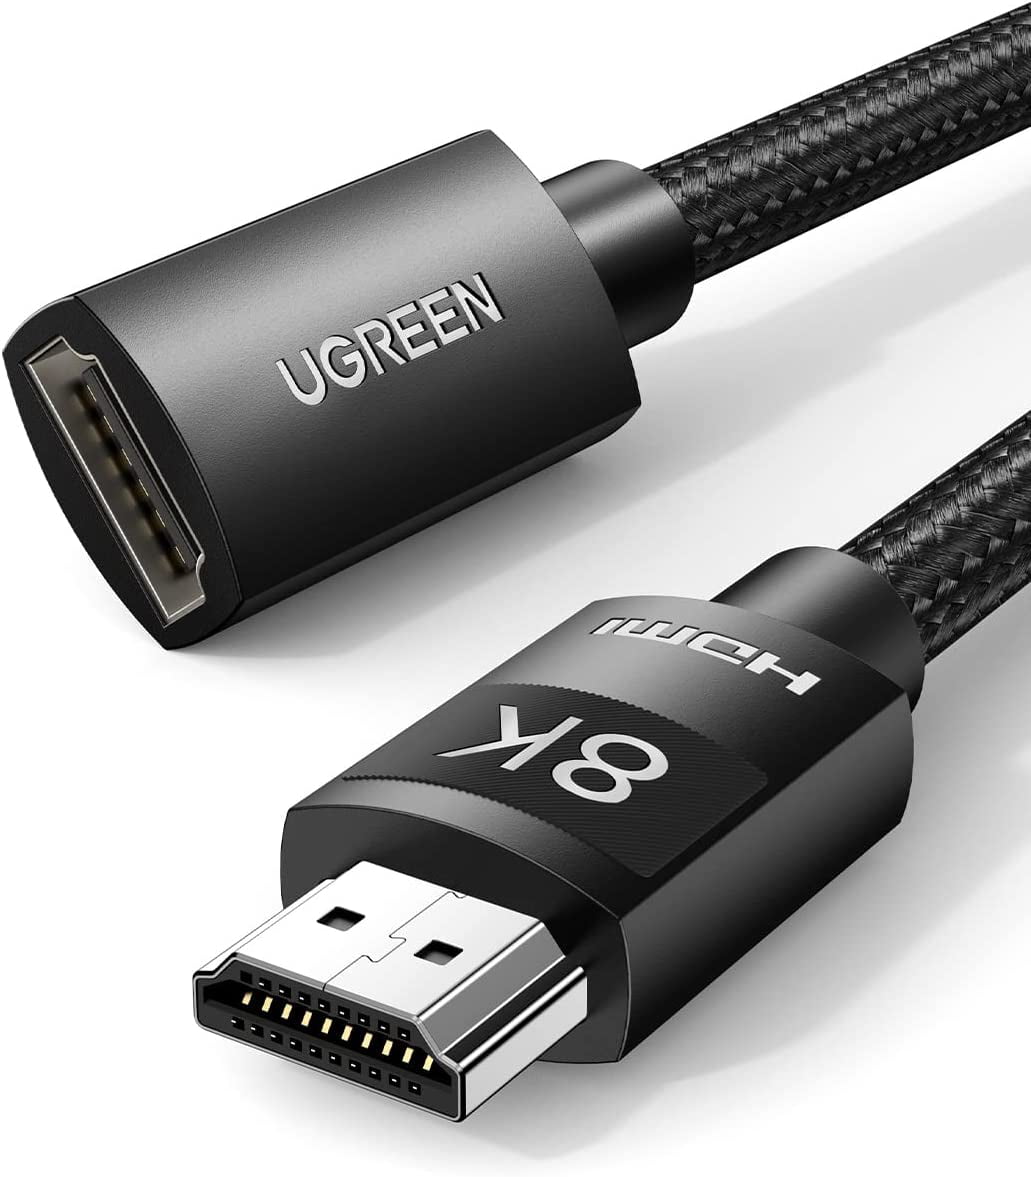 HDMI Extender, HDMI Extension Cable 8K@60Hz 4K@120Hz, 2.1 Ultra High Speed 48Gbps, HDMI Male to Female Adapter Compatible with MacBook Pro 2021/PS5/Xbox X/Roku TV/UHD TV/Blu-ray, 6.6 FT - Walmart.com